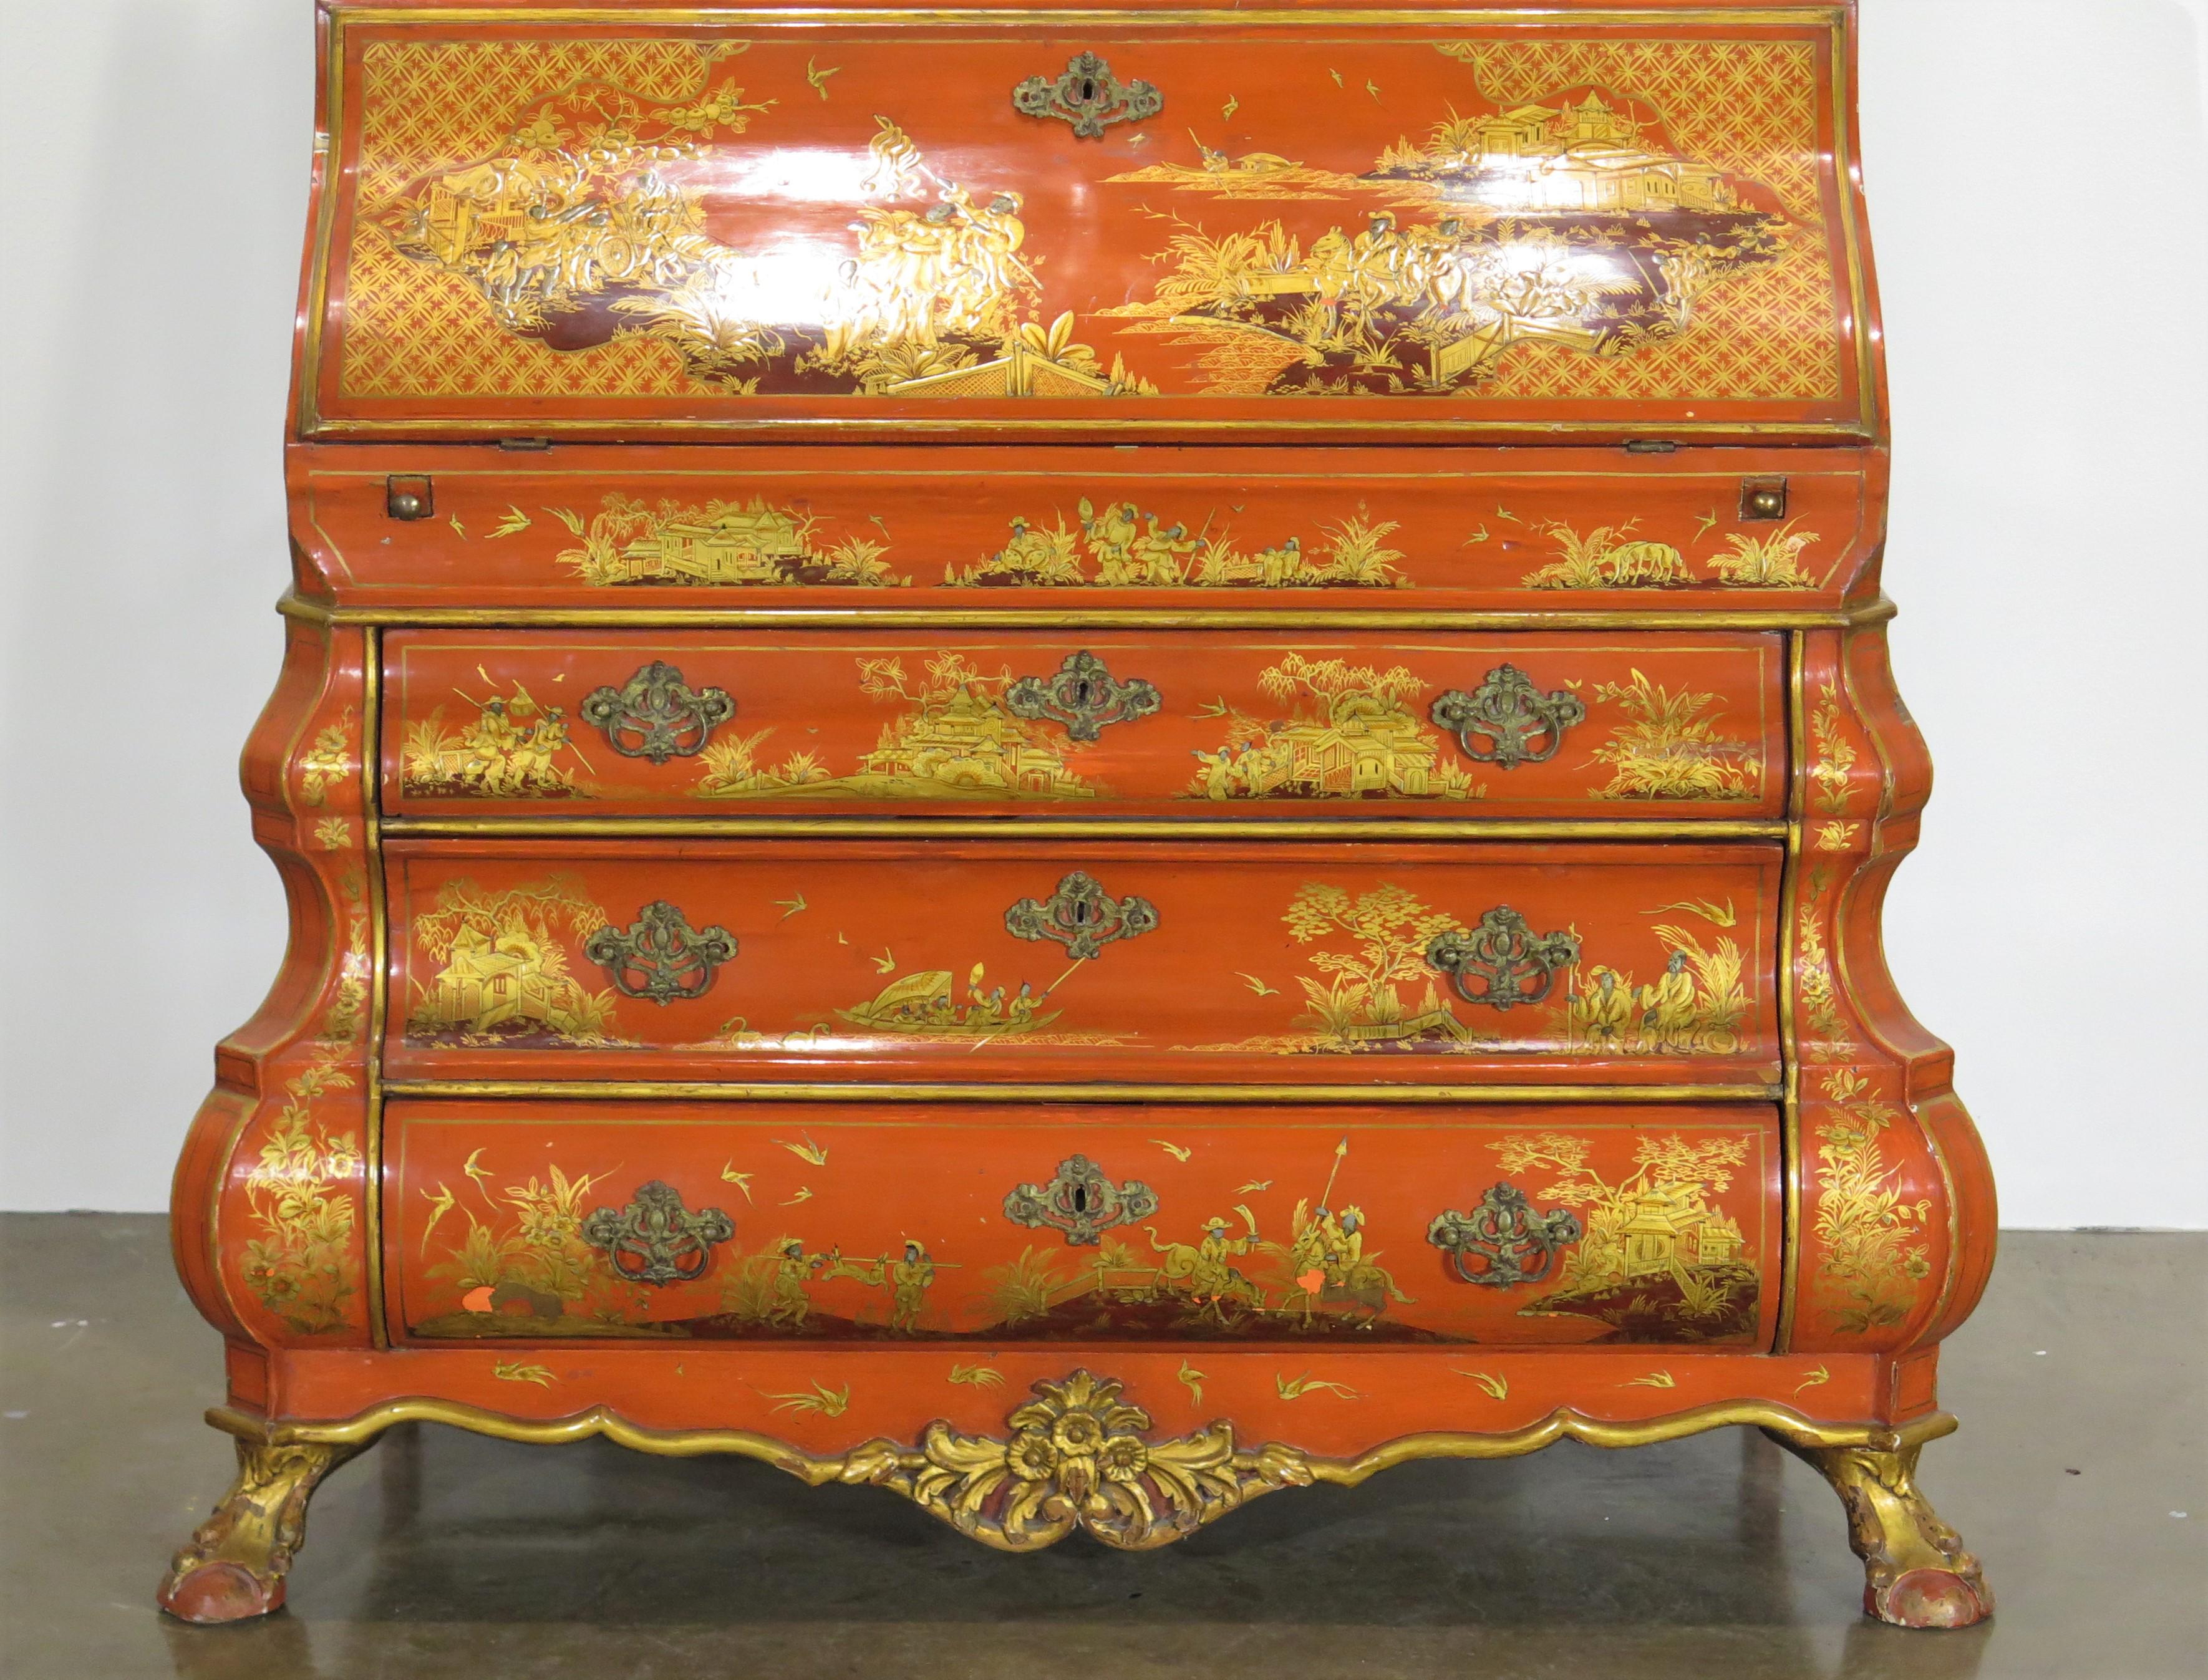 20th Century Queen Anne-Style Chinese Red Chinoiserie Desk and Bookcase